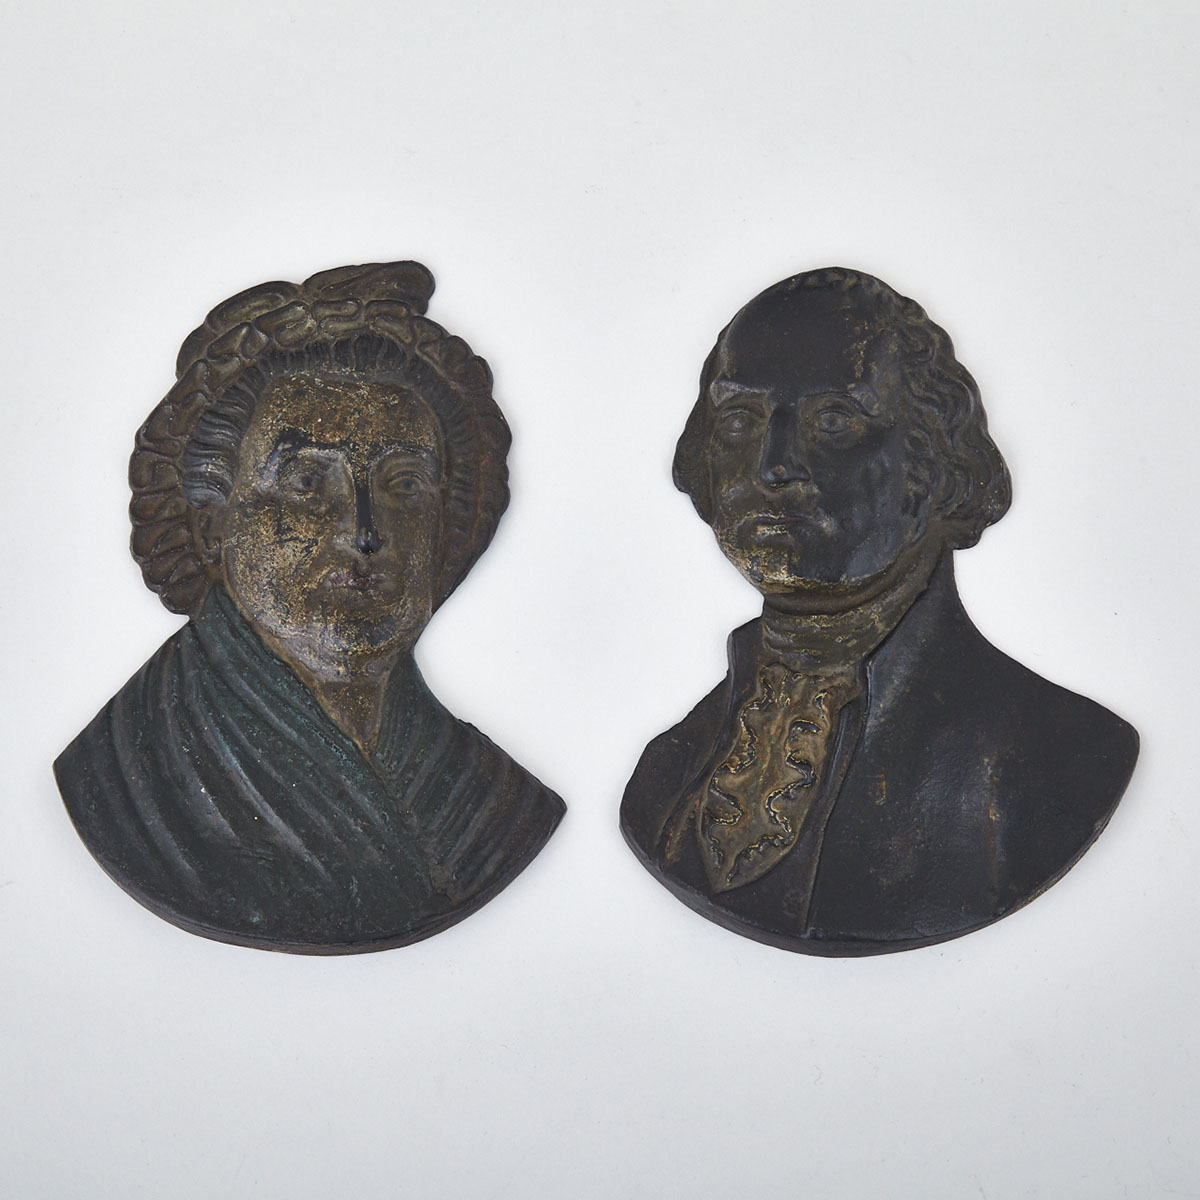 Pair of Polychromed Cast Iron Relief Portrait Plaques of George and Martha Washington, 19th/early 20th century